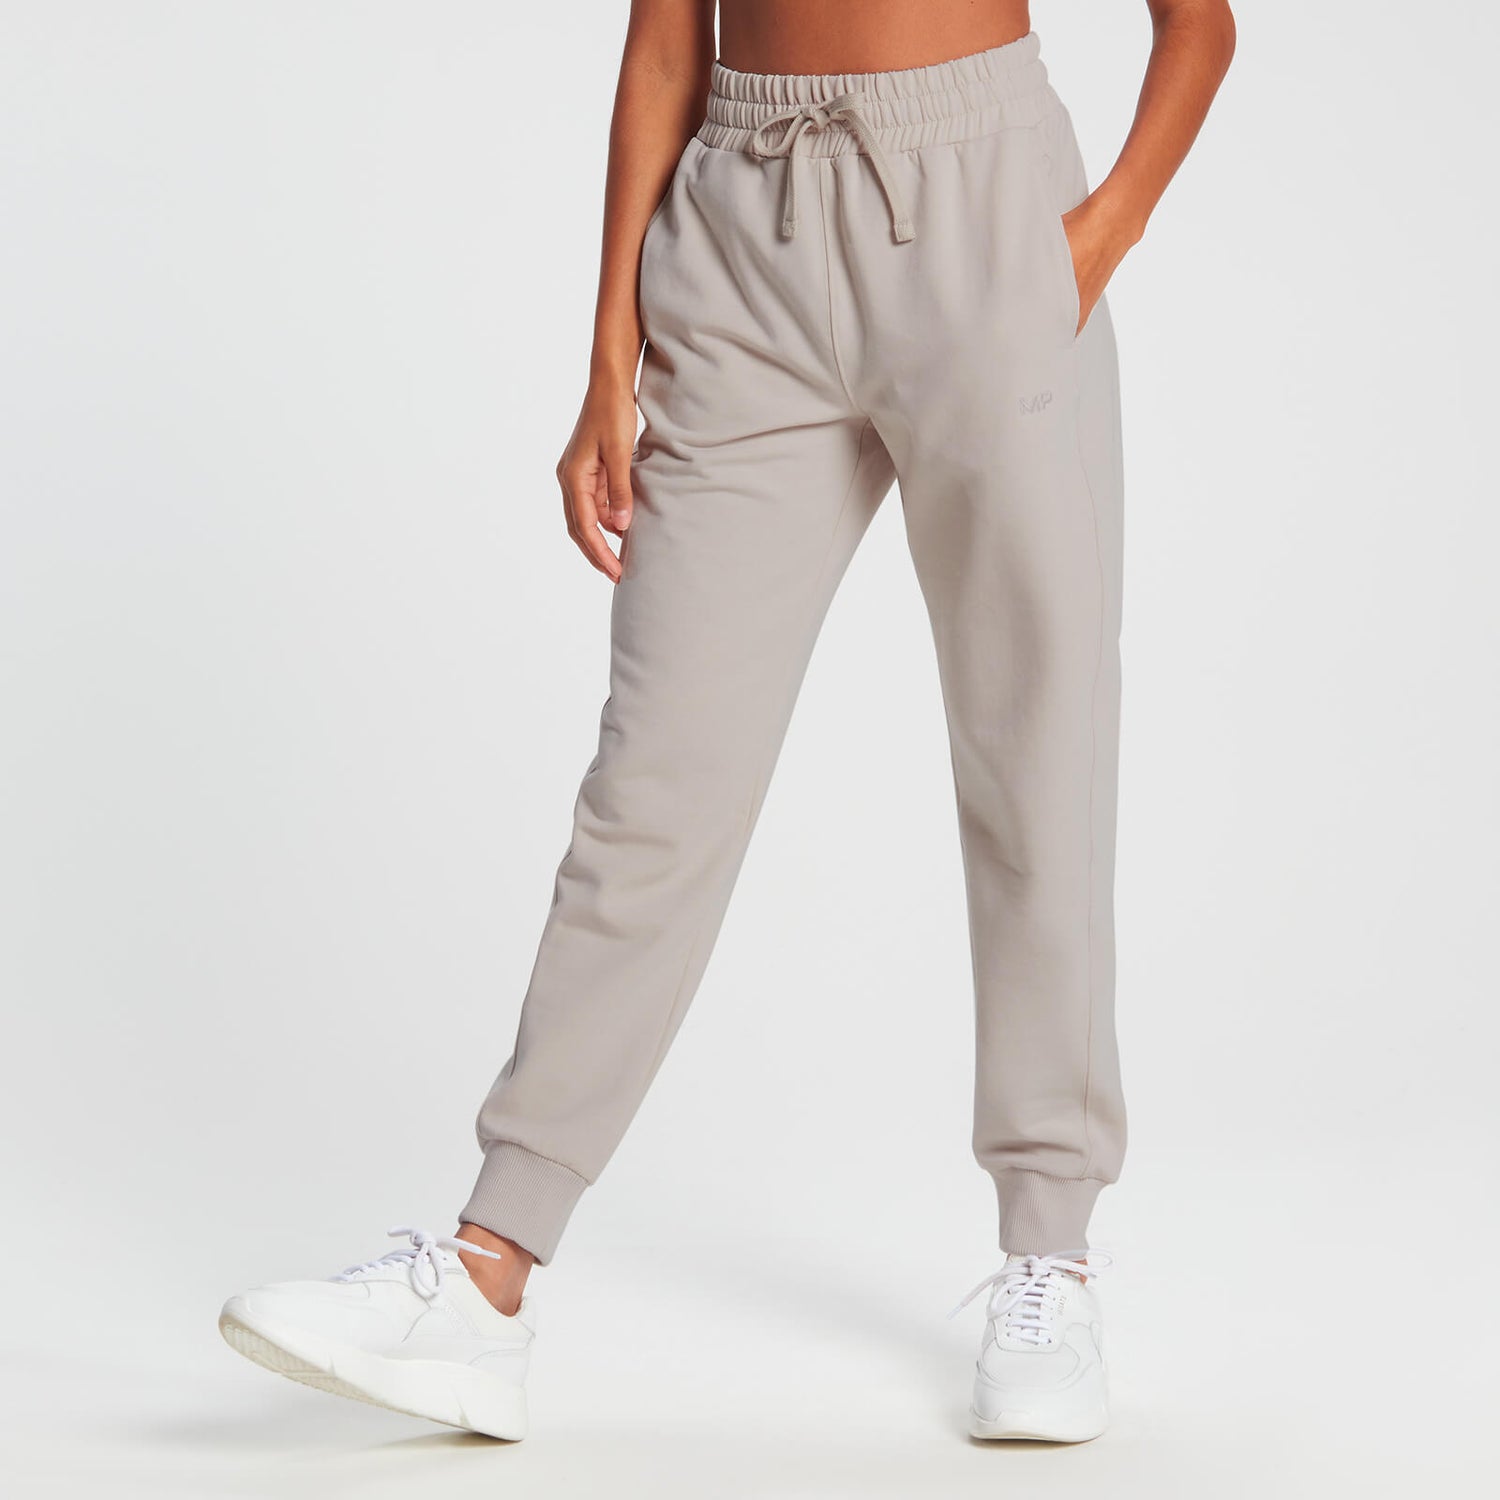 Joggers Rest Day para mujer de MP - Gris hueso - XS